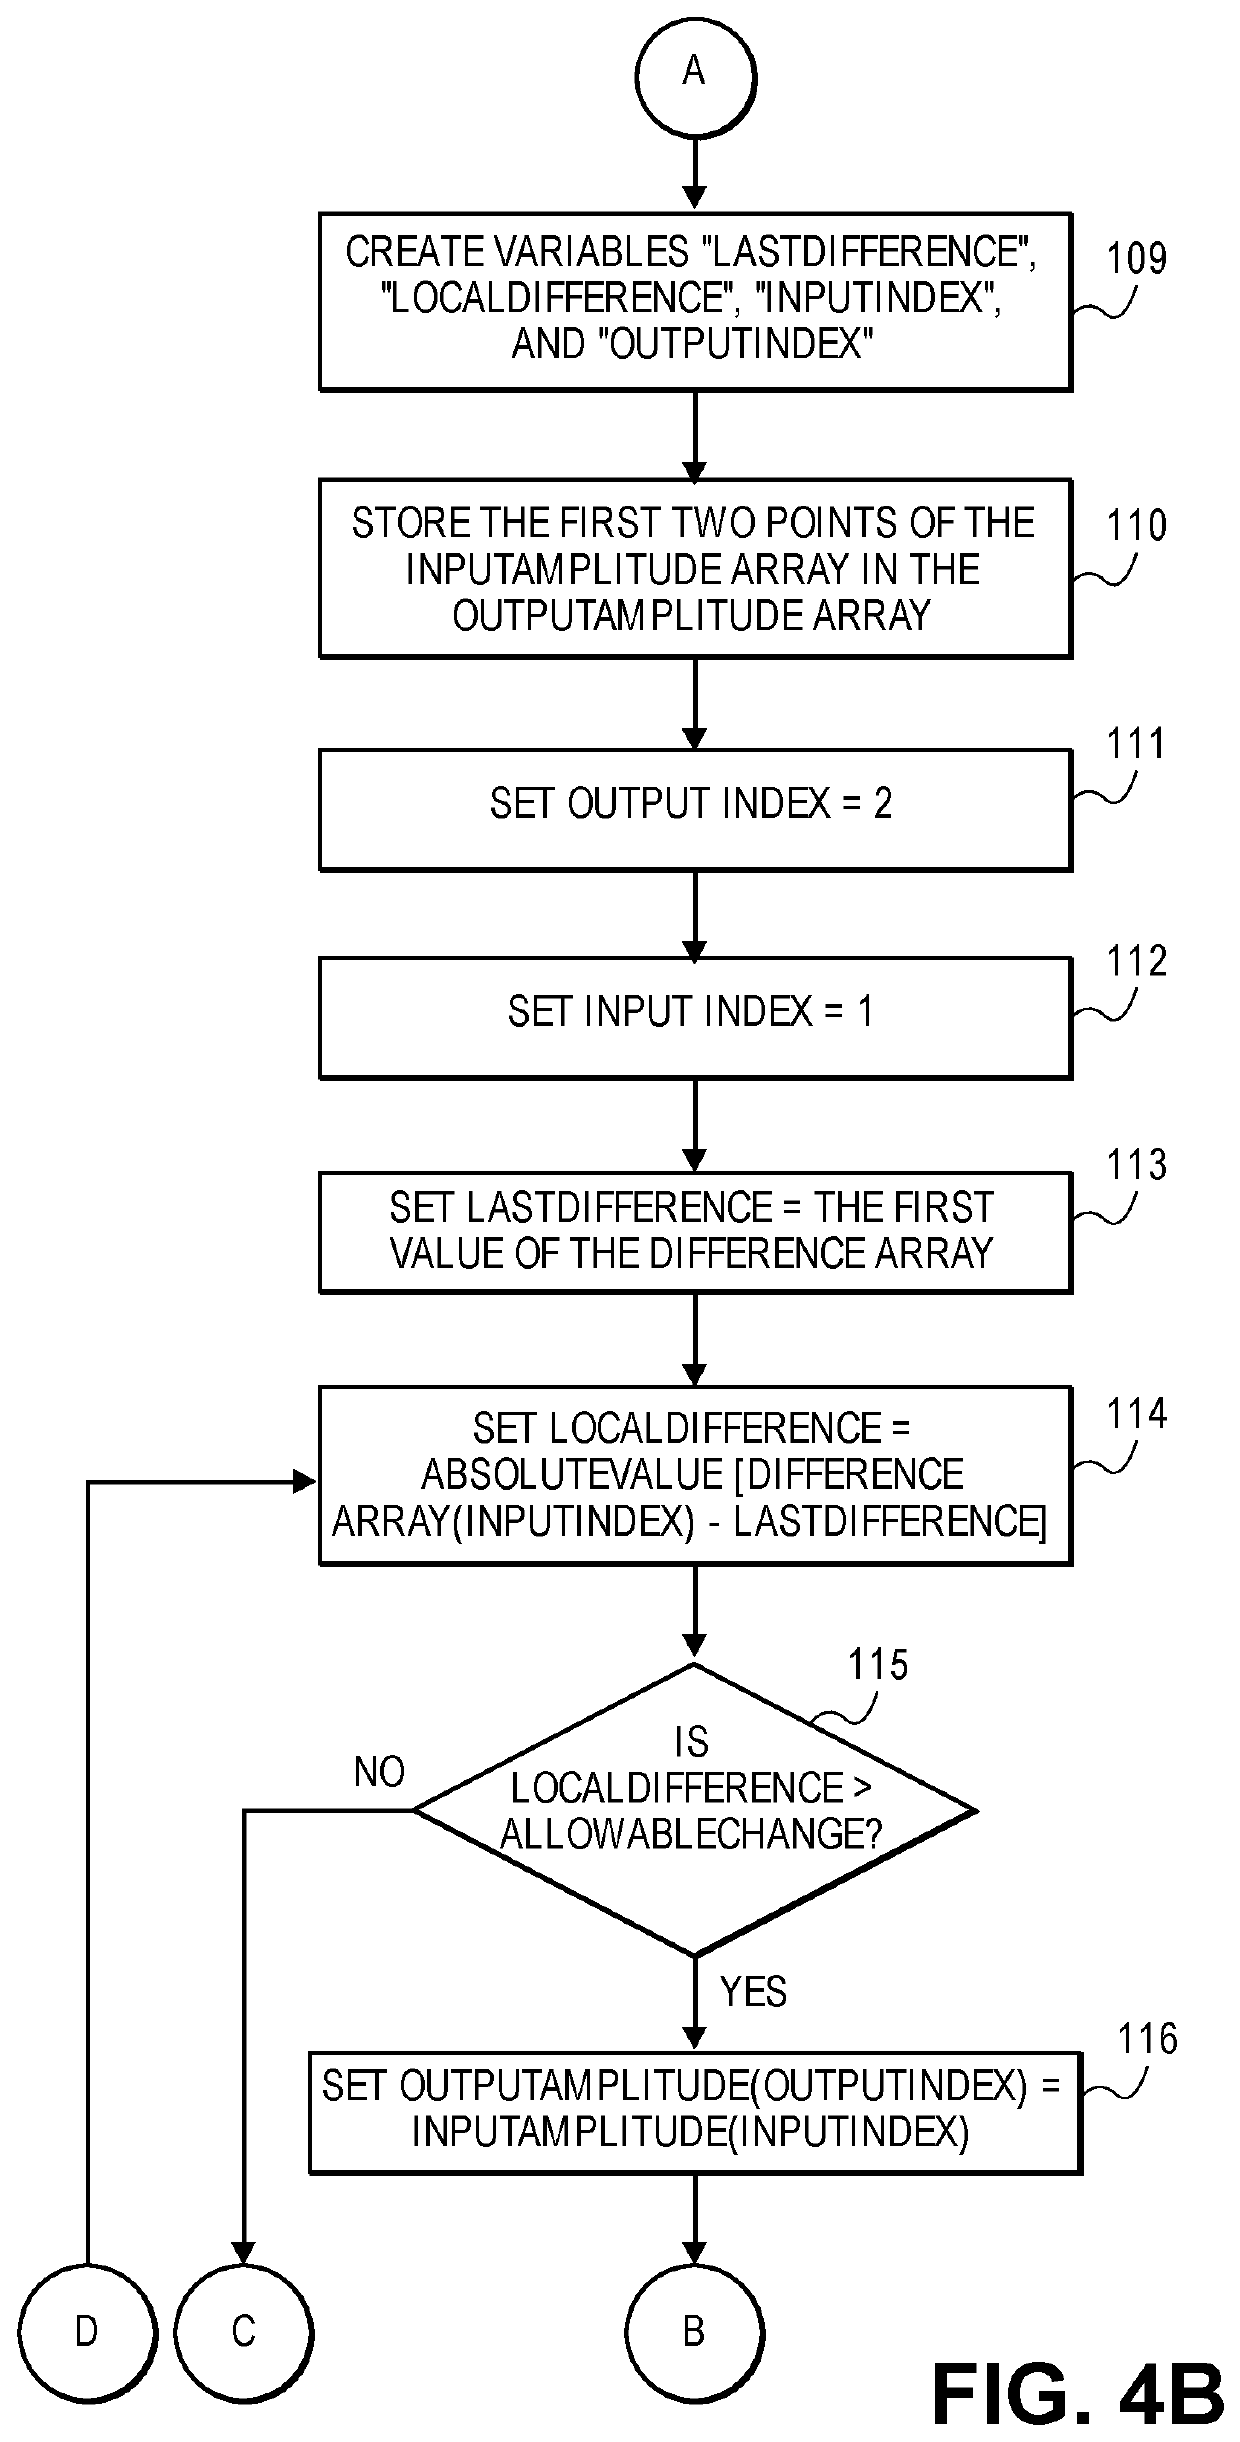 Electronic device and method for compressing sampled data